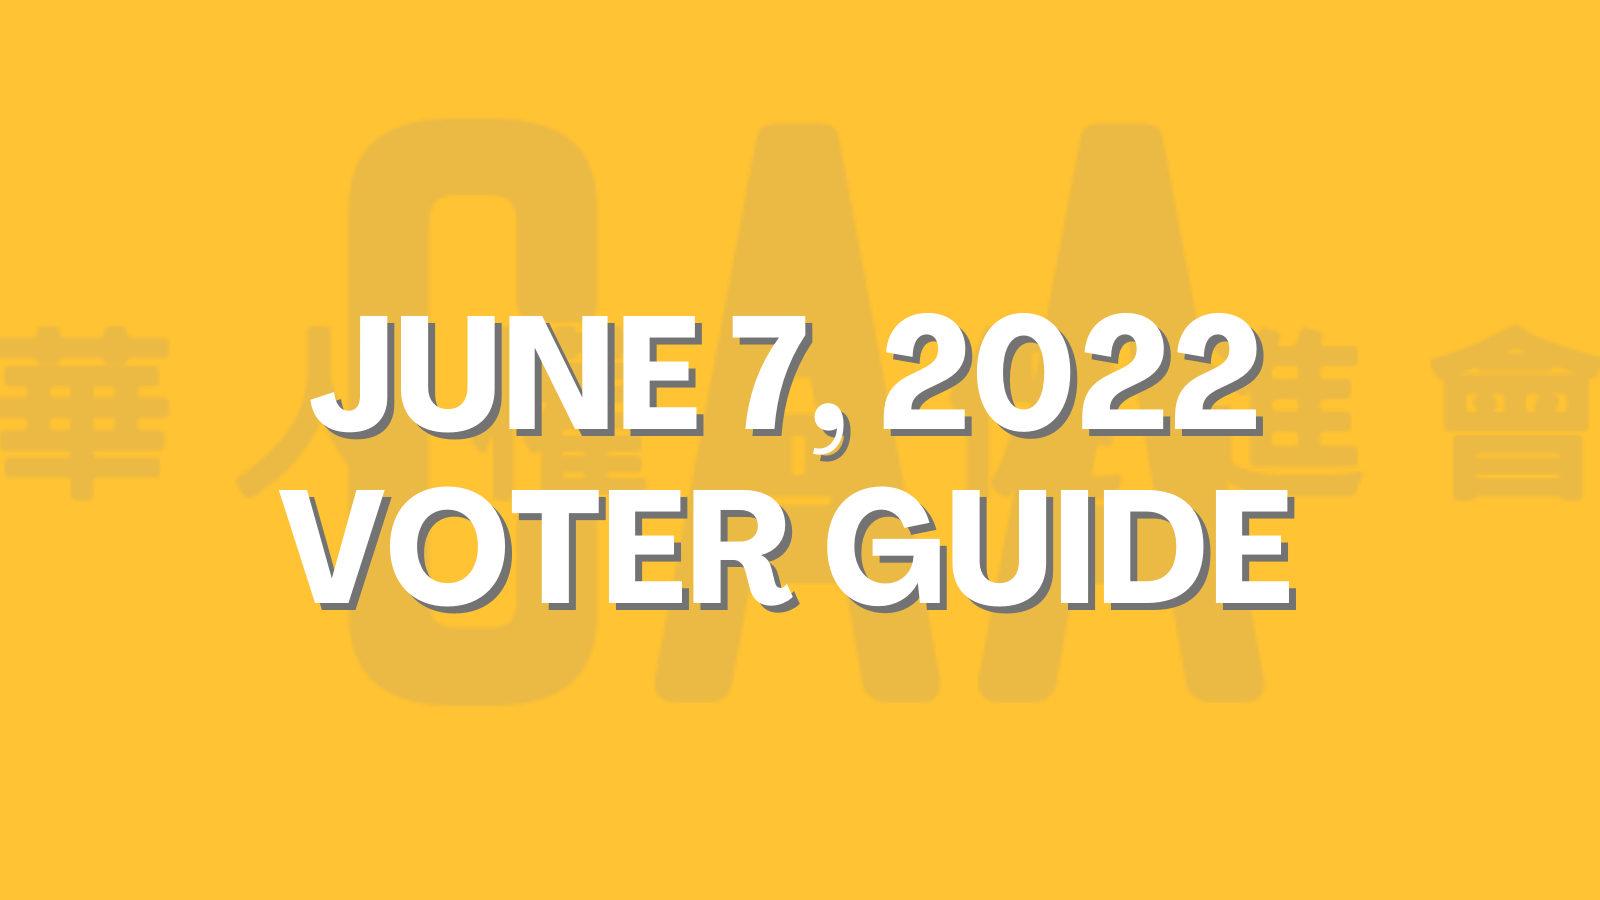 Chinese for Affirmative Action. June 7, 2022 voter guide.